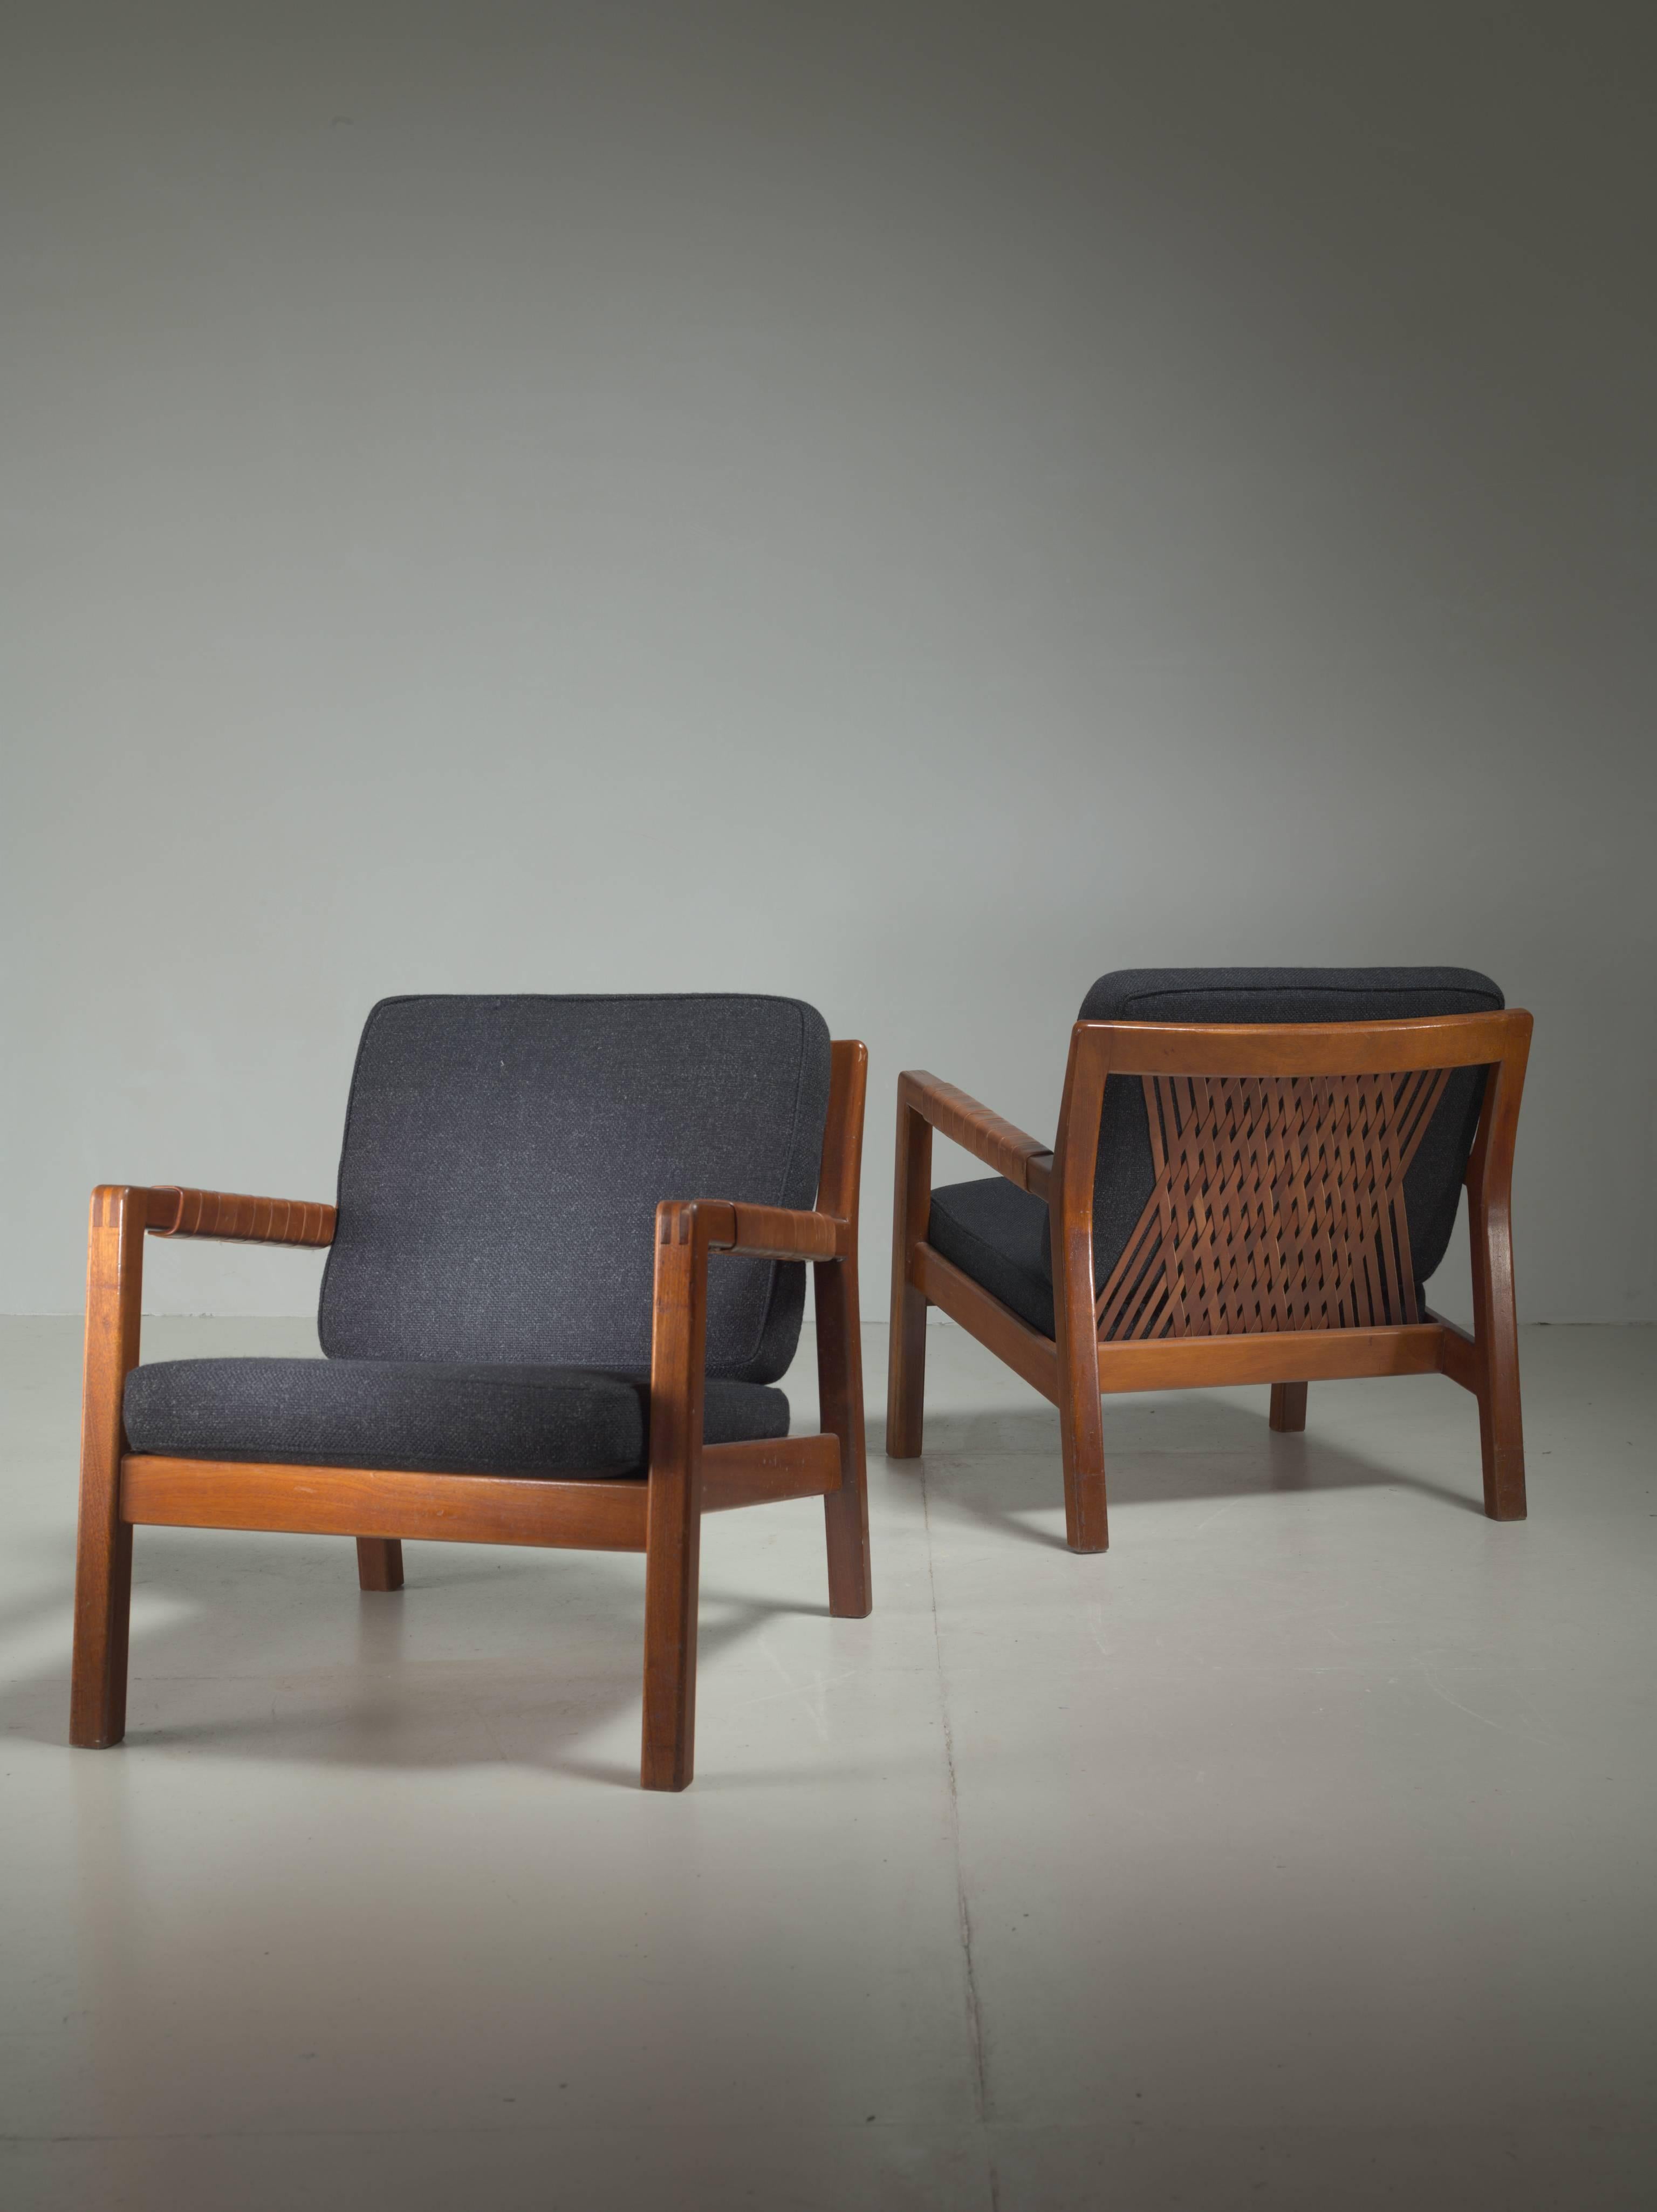 Scandinavian Modern Carl Gustav Hiort af Ornäs Pair Oak and Leather Armchairs, Finland, 1950s For Sale